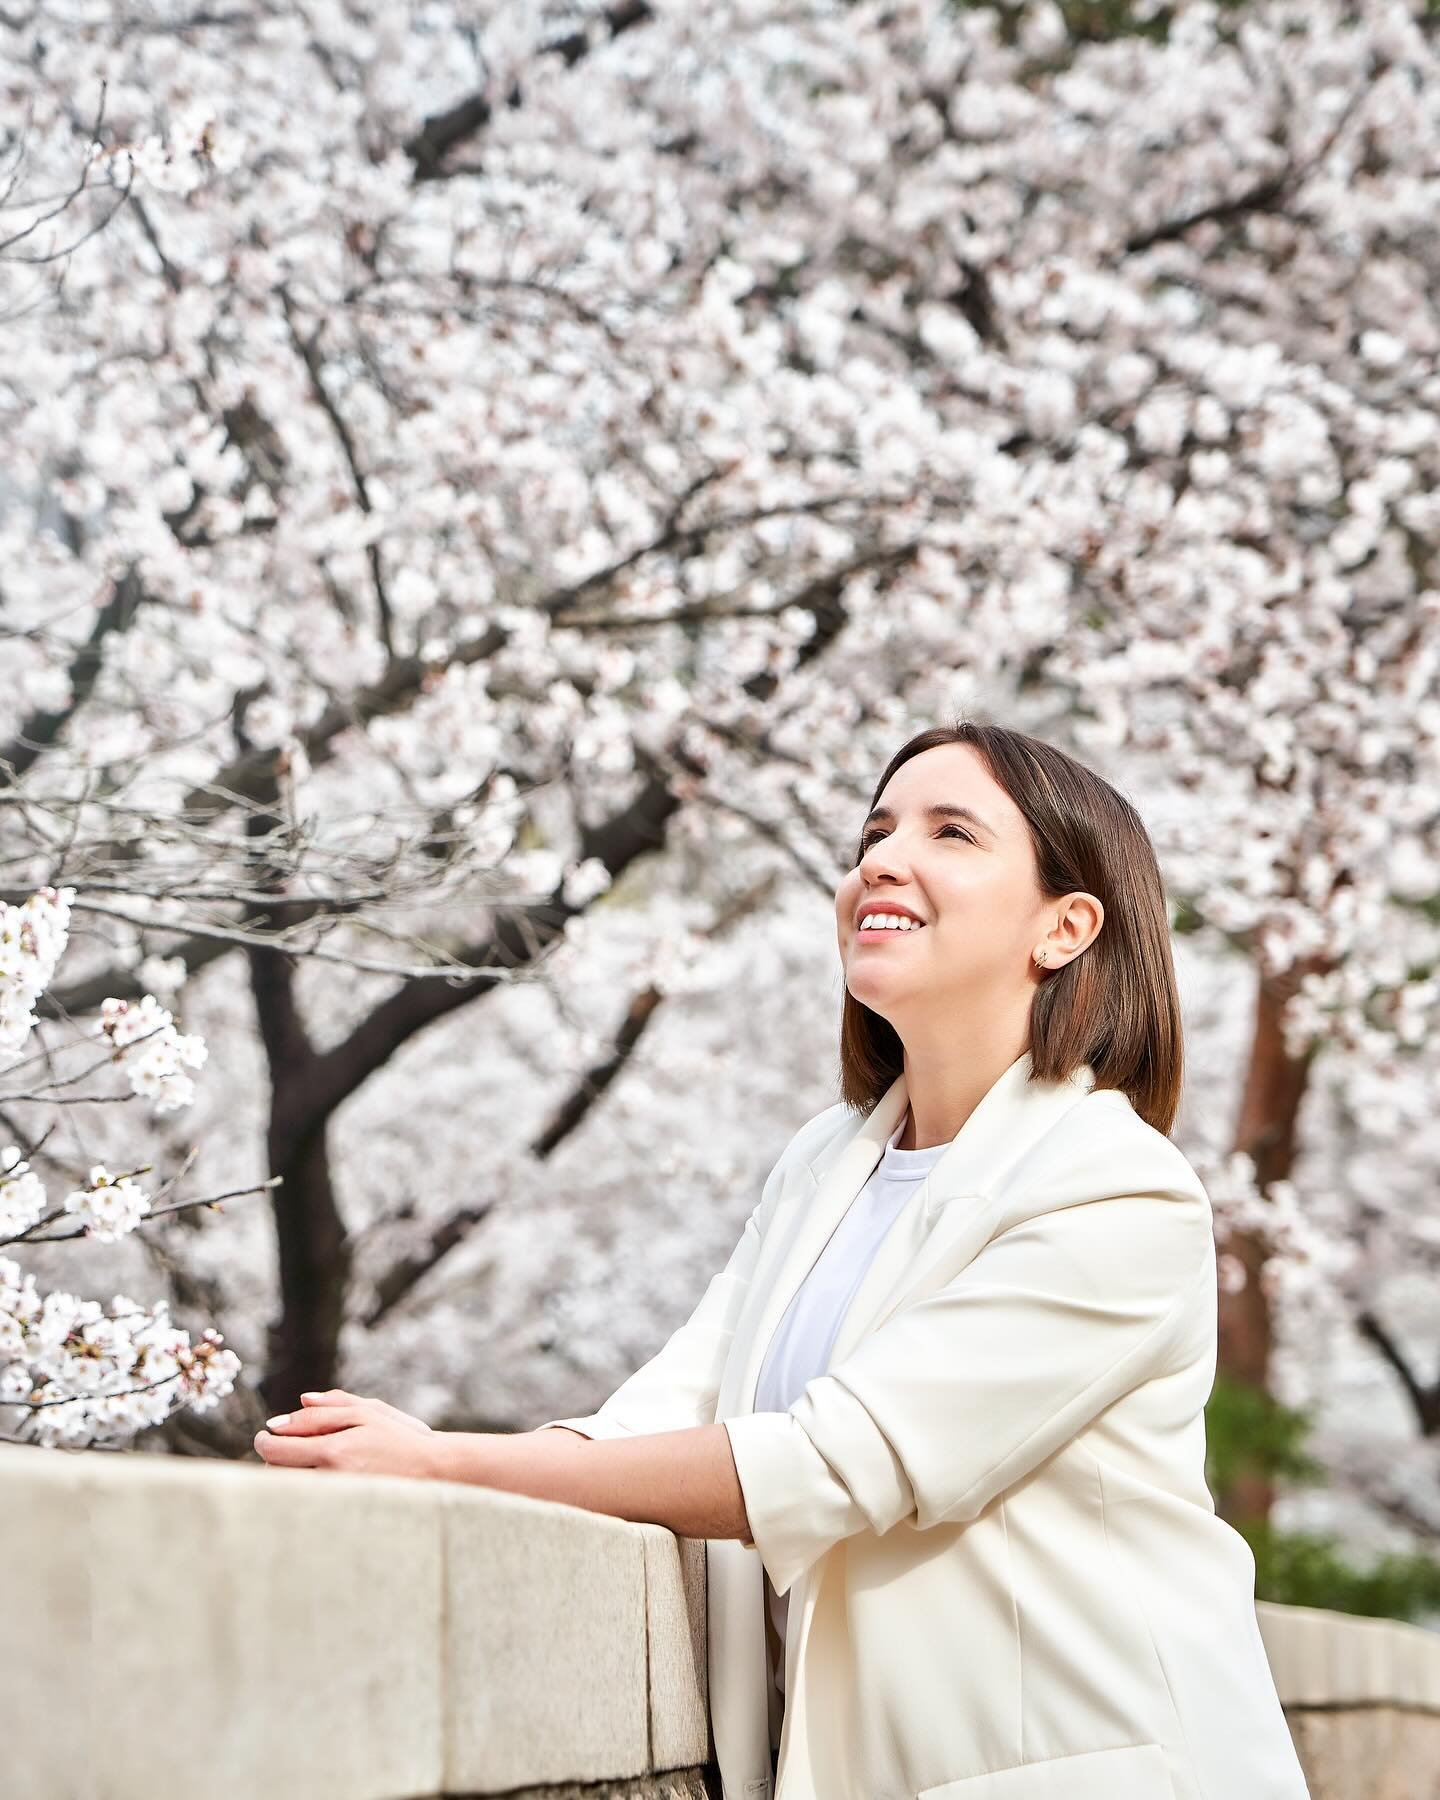 Our #helloMMCA Interview

With the cherry blossom season in full swing, I headed to Gwacheon along with other creators in the #helloMMCA program for an interview for this month&rsquo;s newsletter.

The interview was a chance to not only get inspired 